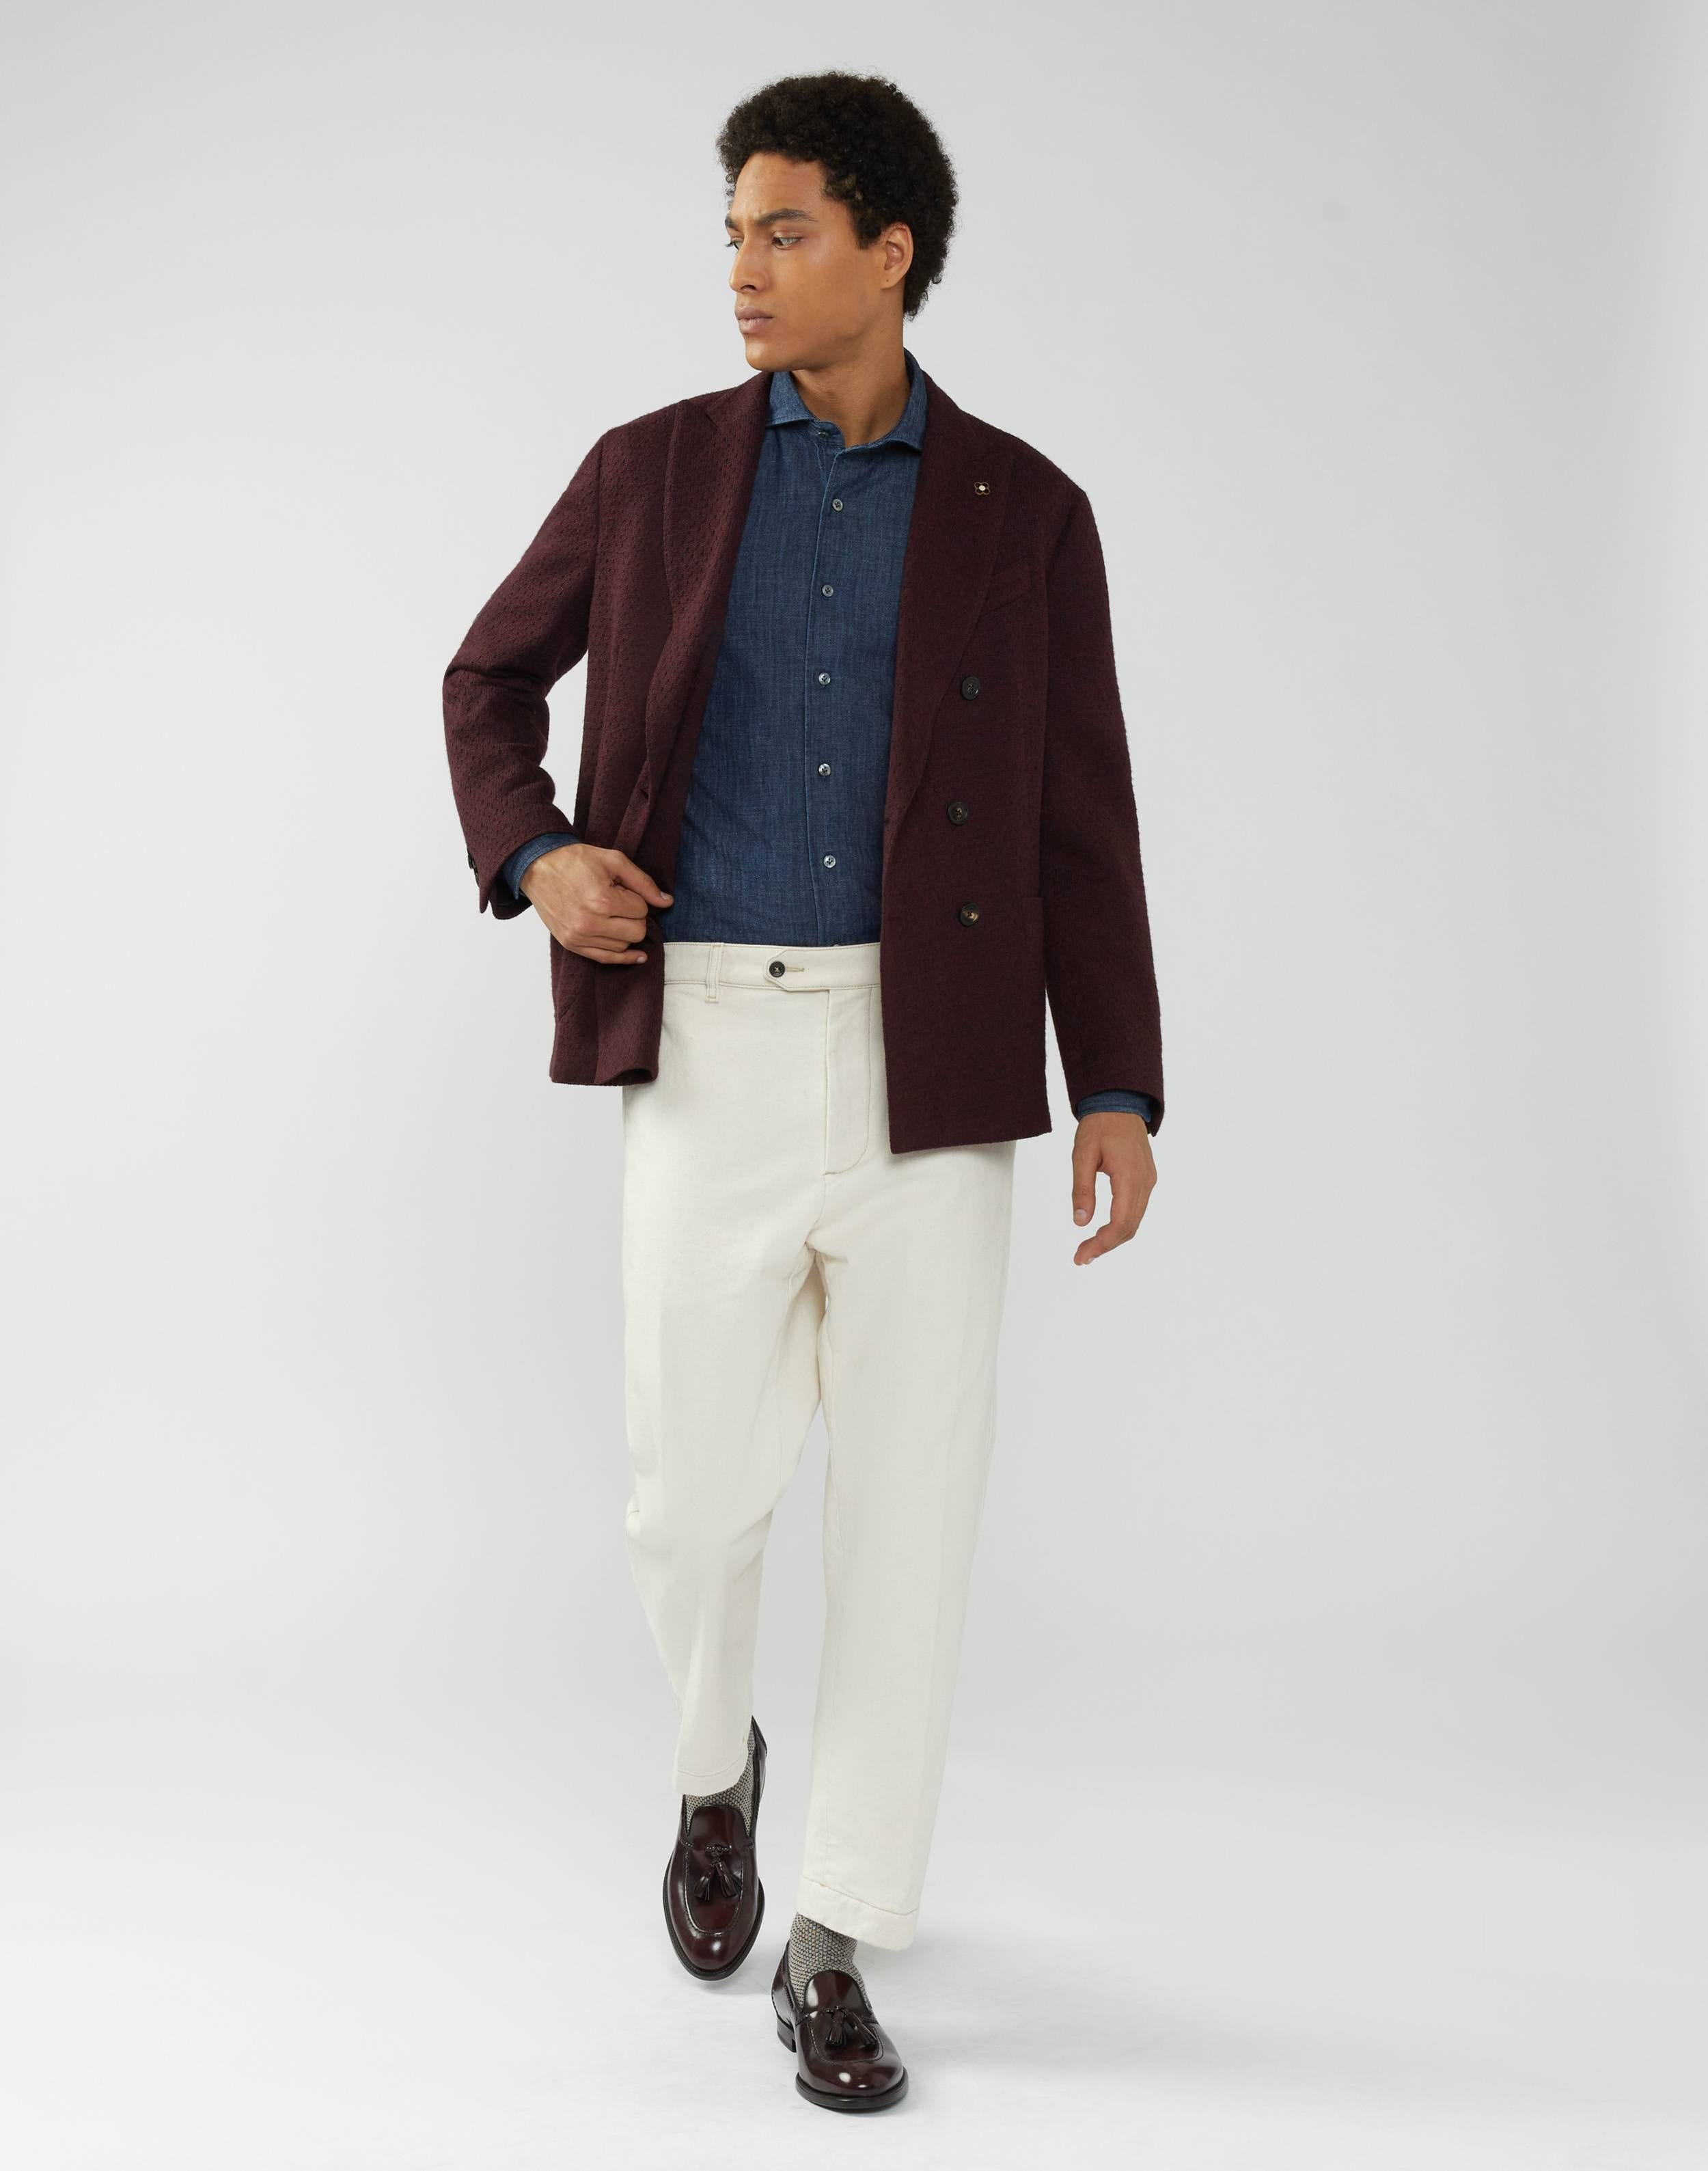 Double-breasted burgundy knitted jacket - Liknit